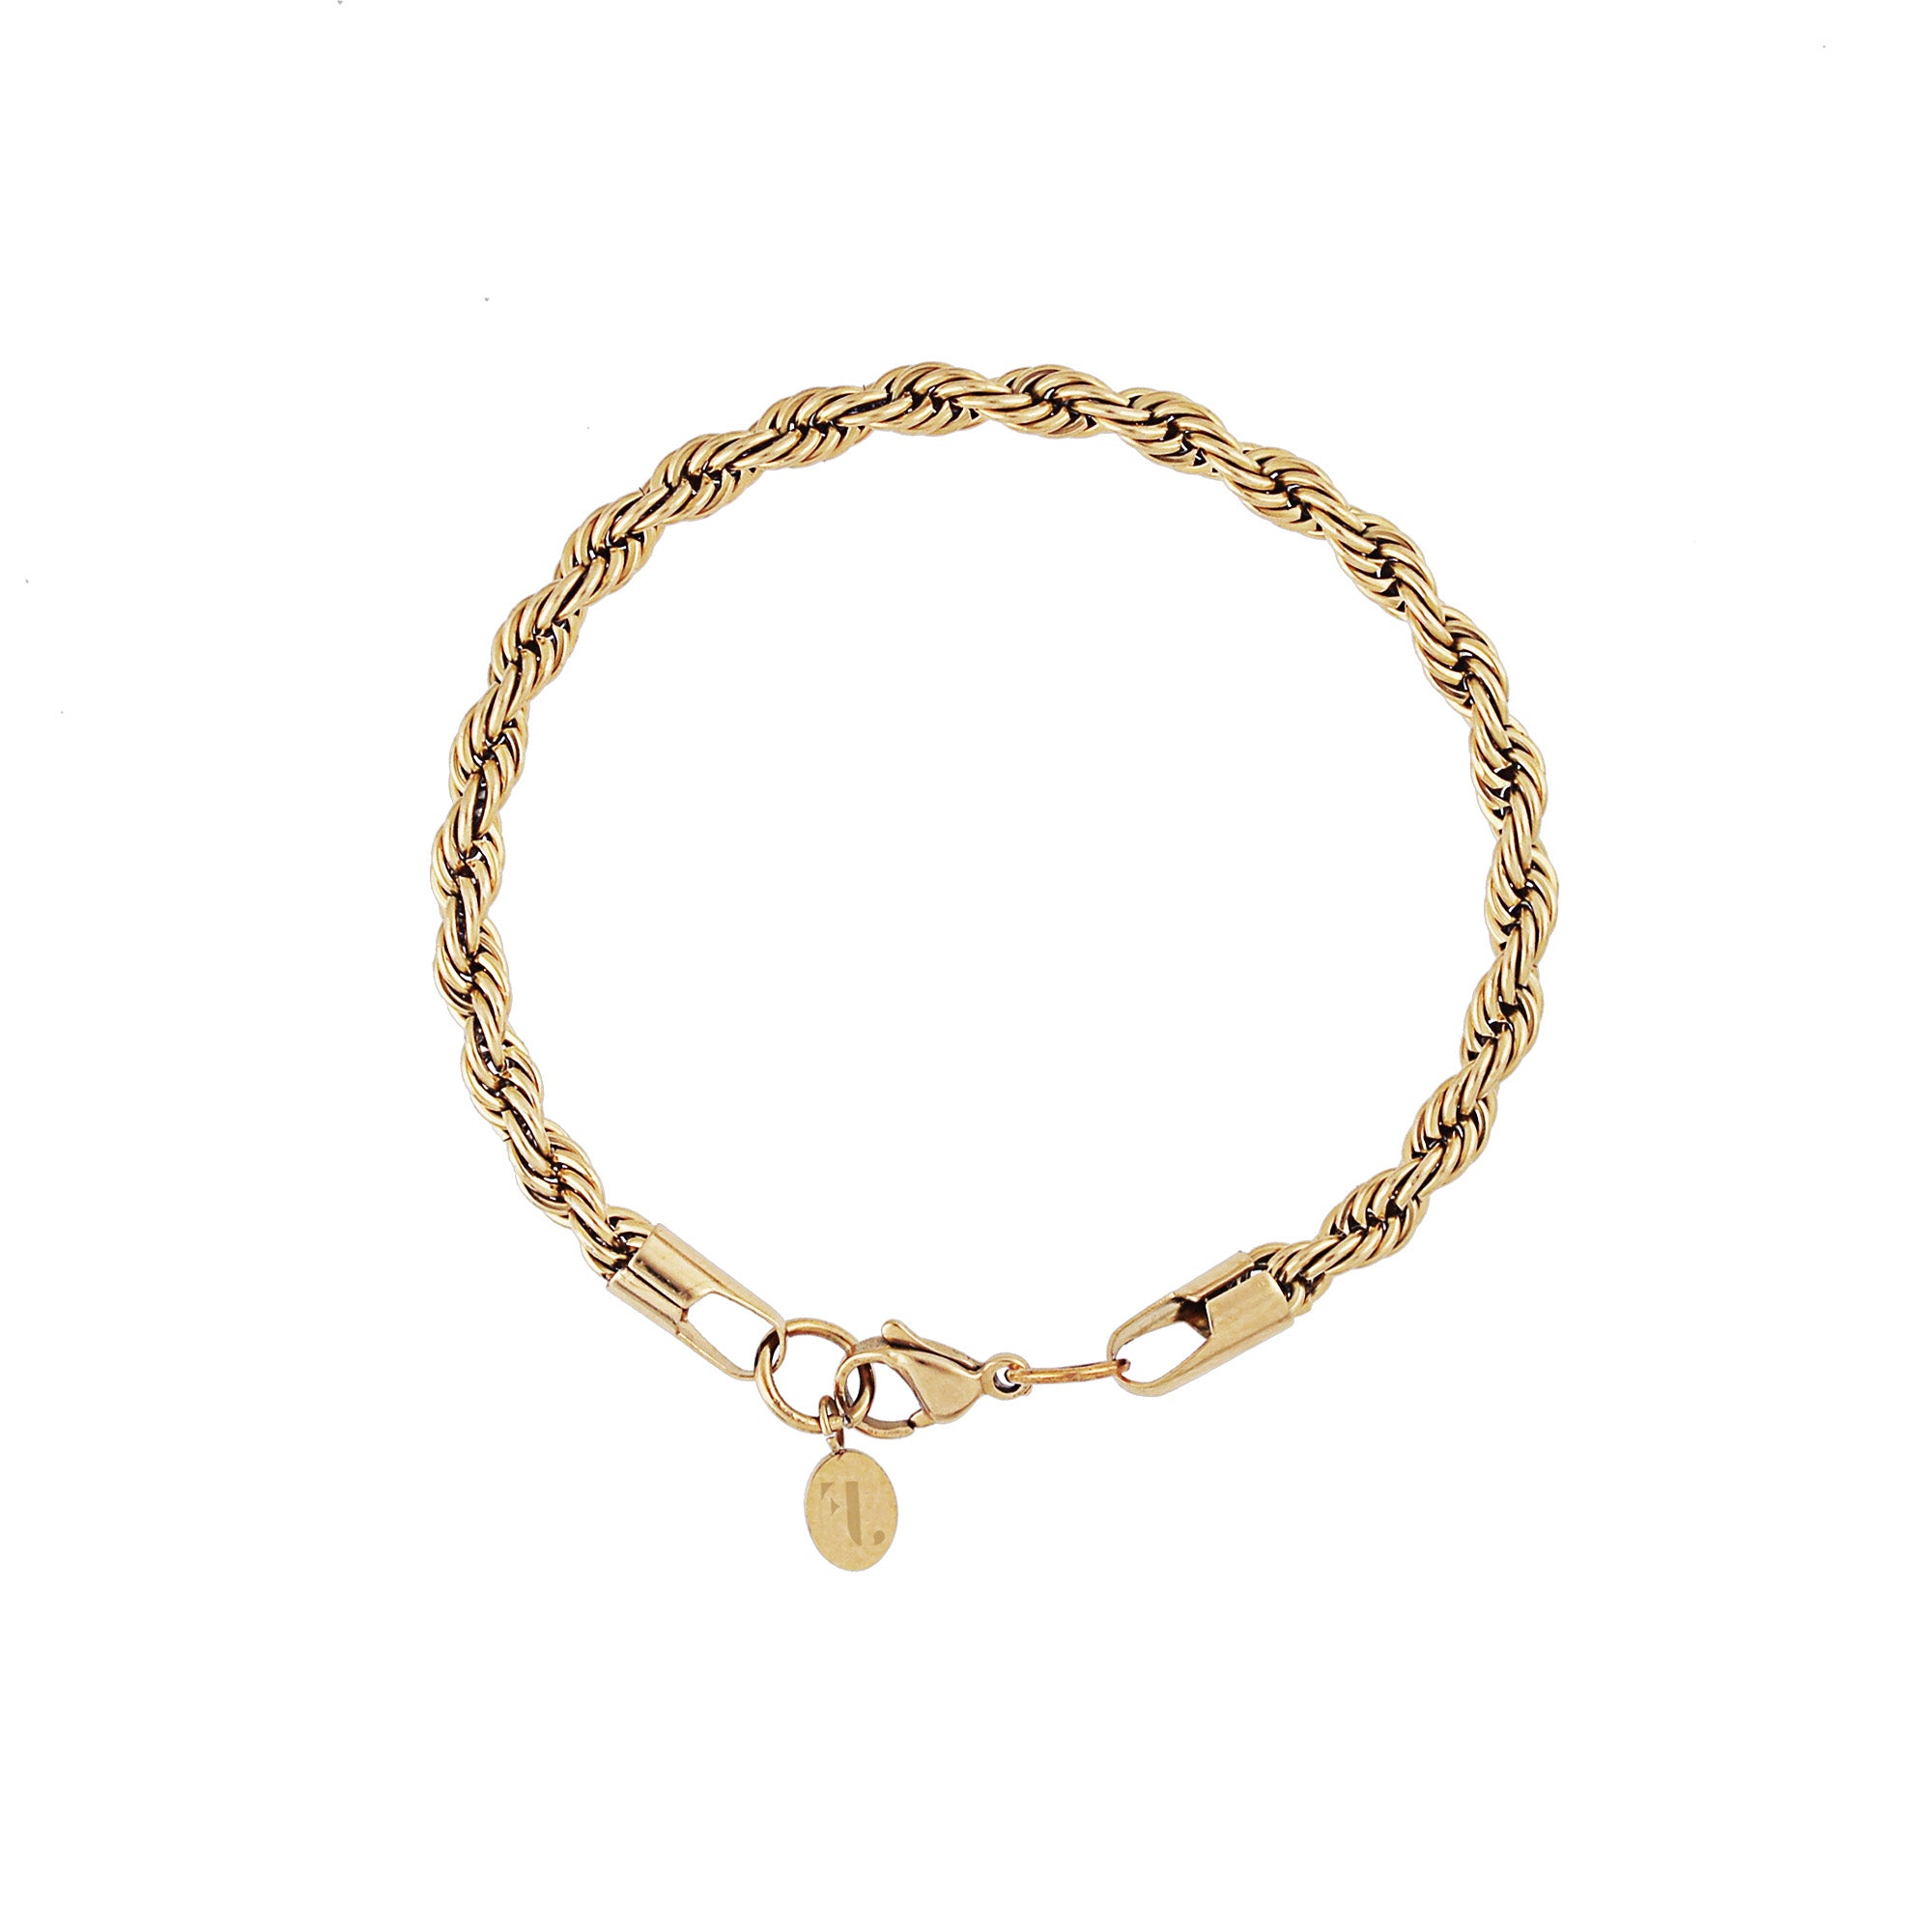 Don men's bracelet by Five Jwlry, crafted from a bold 5mm French rope twisted chain in gold-colored, water-resistant 316L stainless steel. Available in sizes 20cm and 22cm. Hypoallergenic with a 2-year warranty.